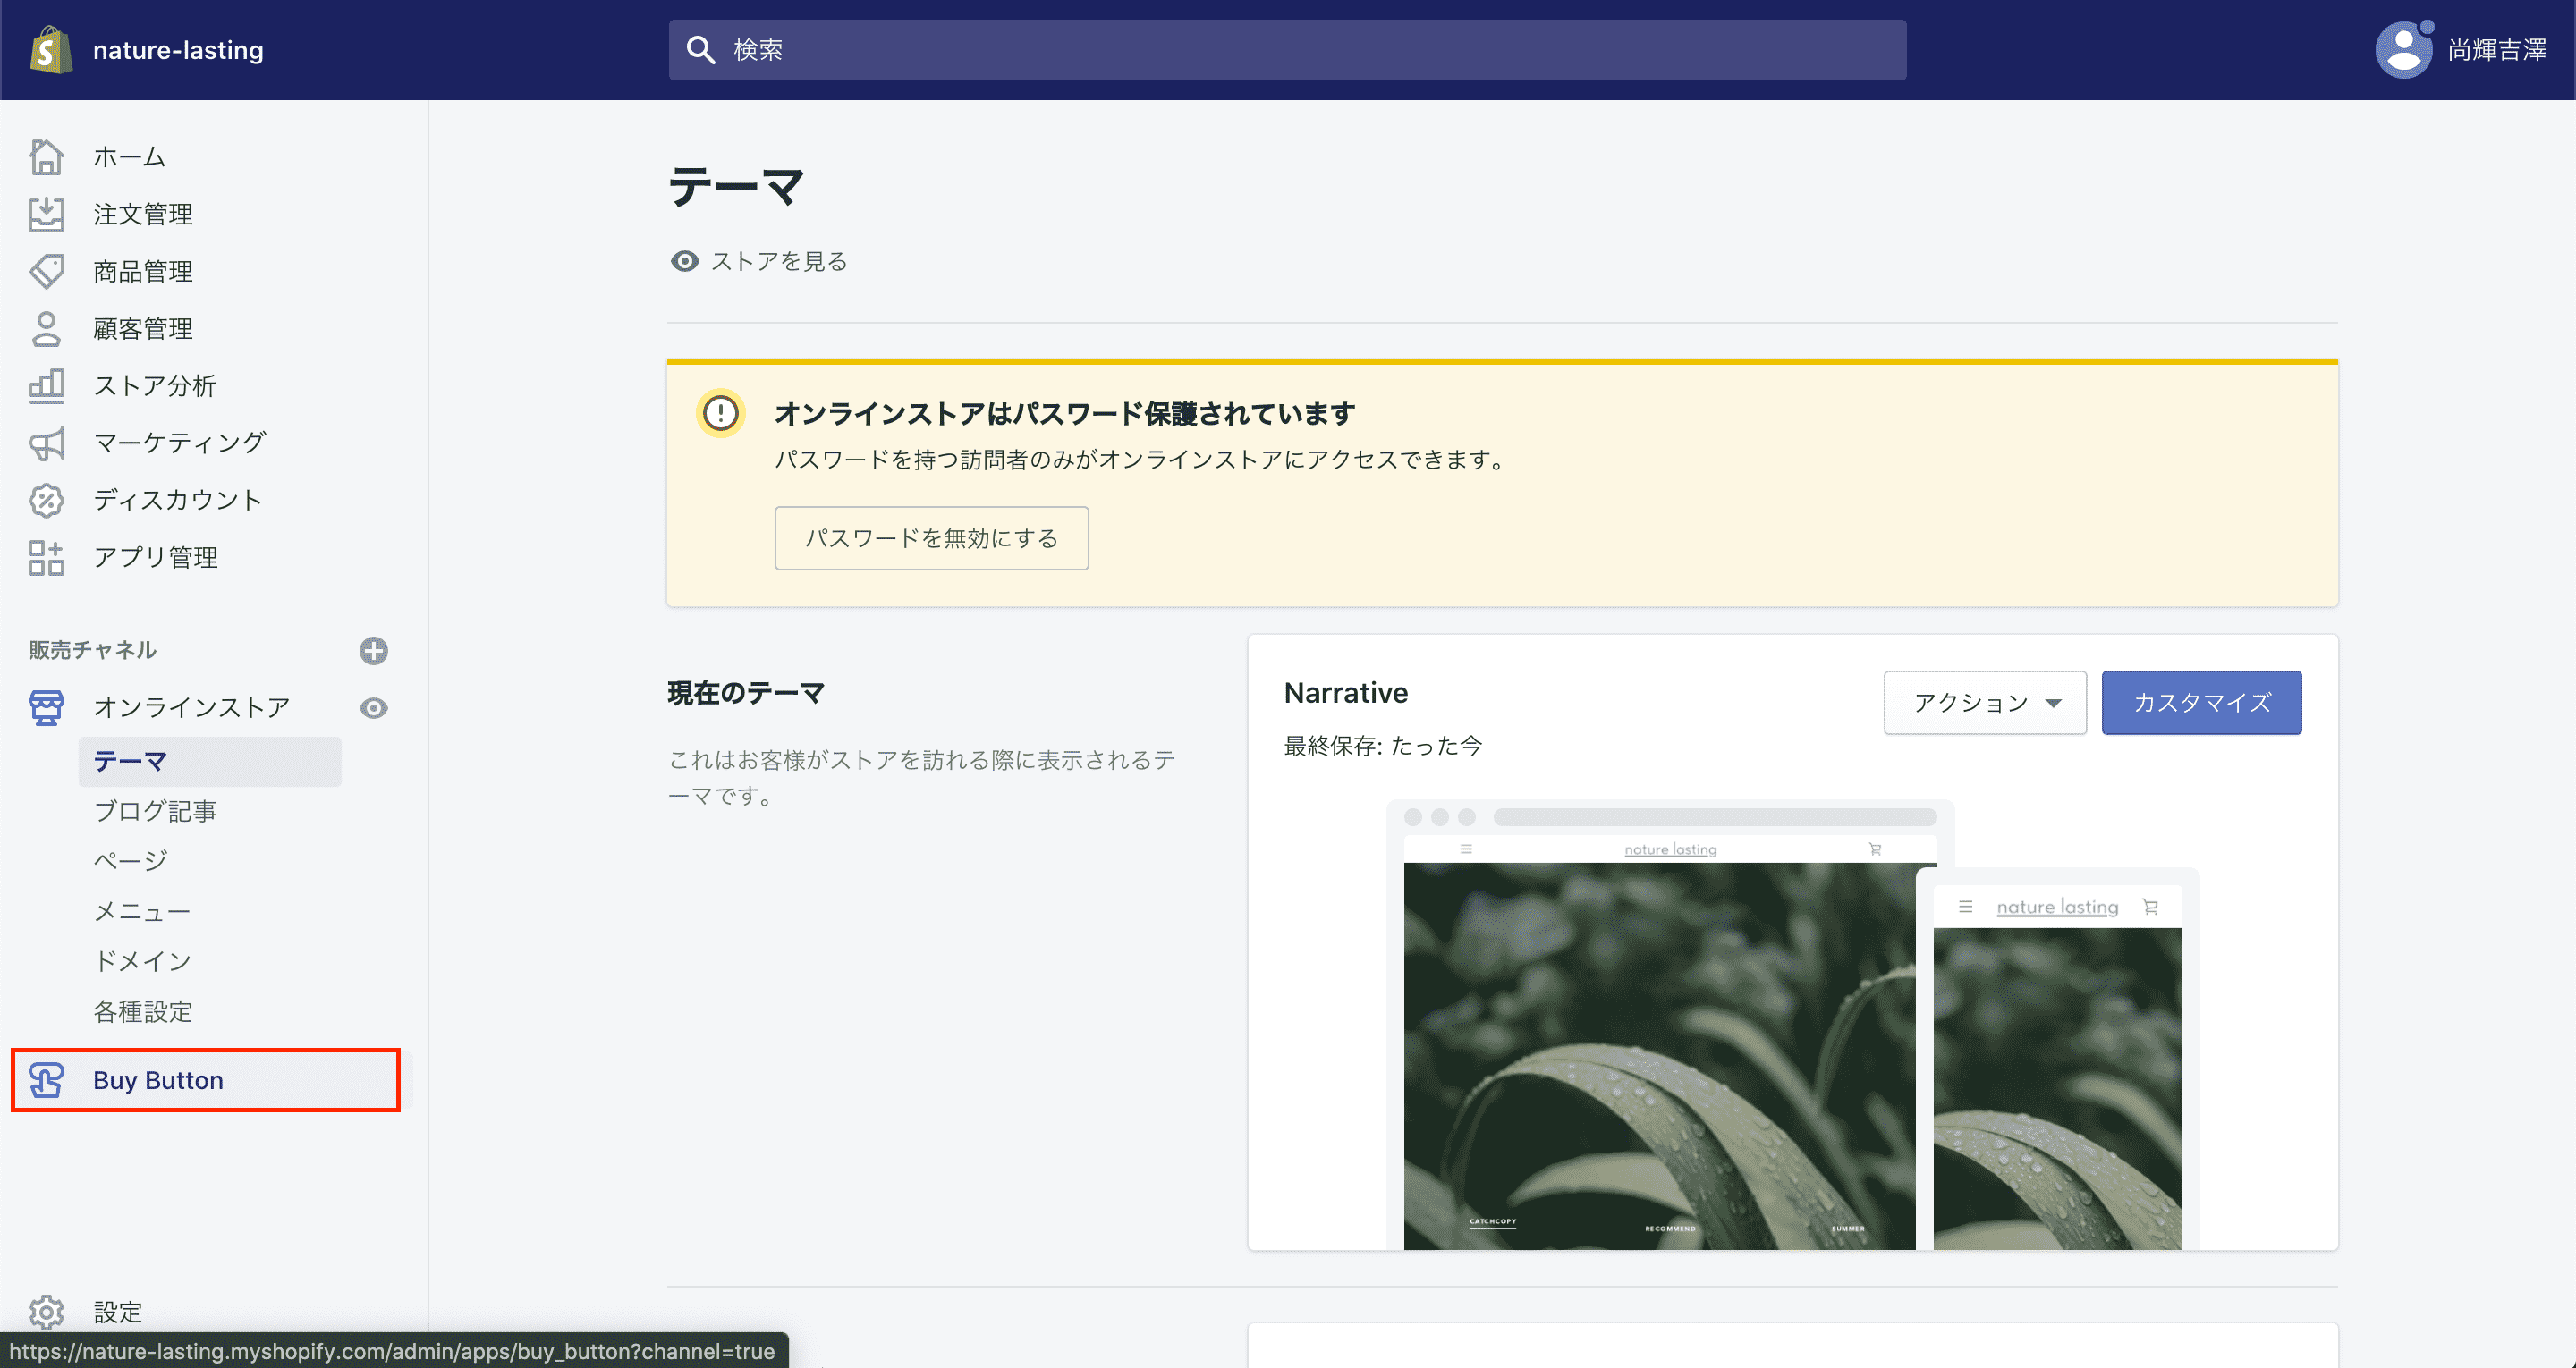 BuyButtonのページへ移動